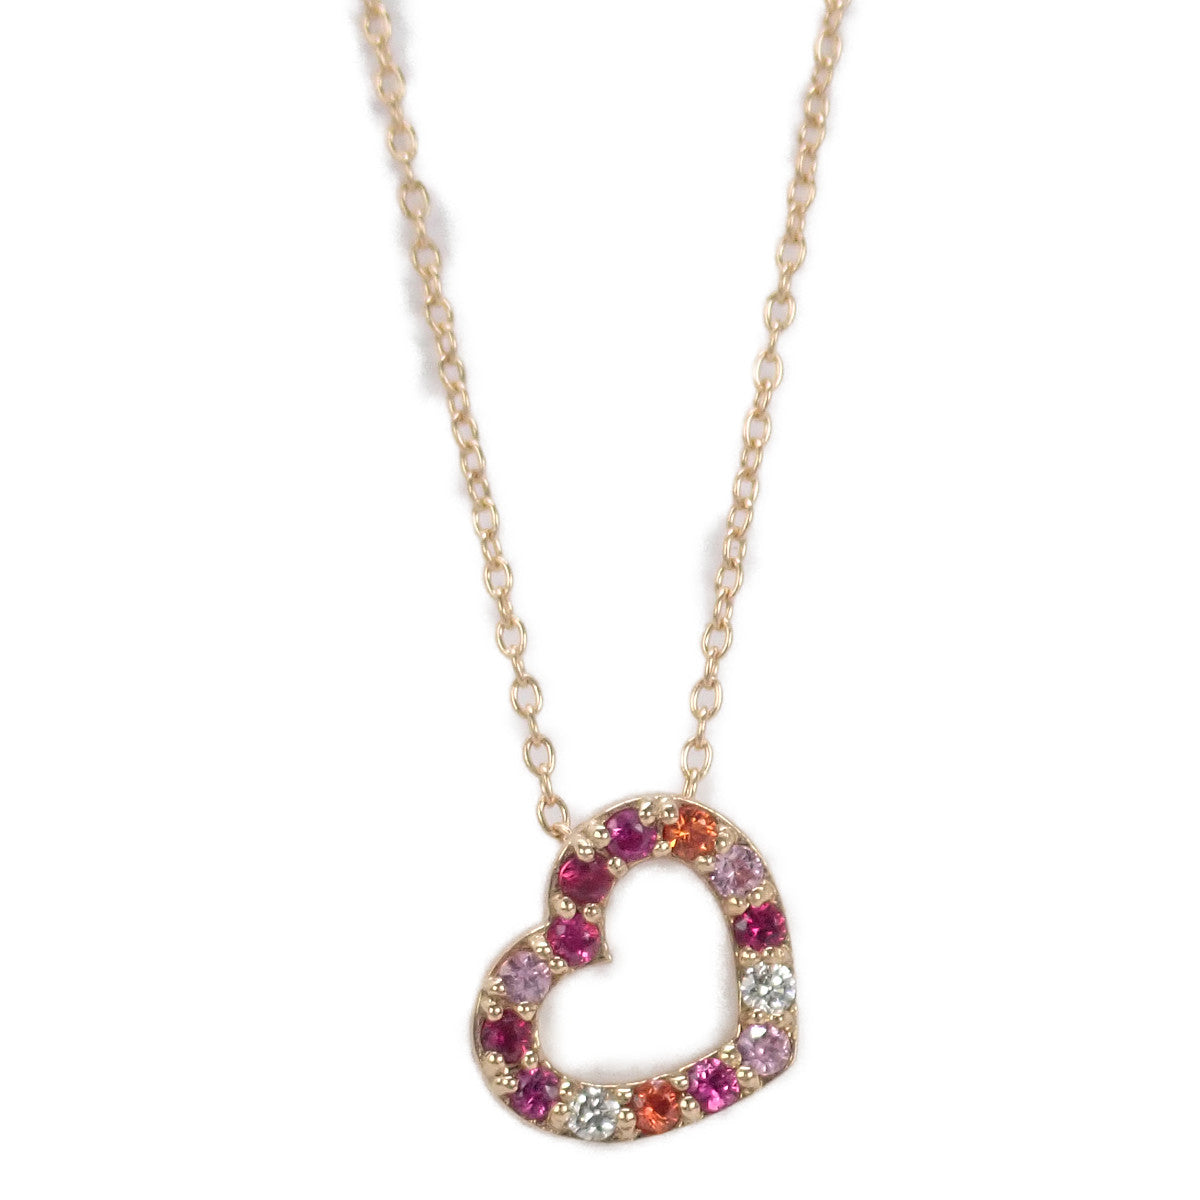 [LuxUness]  Ponte Vecchio Emozione Pompermo Heart Motif Necklace with Diamond 0.02ct, Ruby 0.03ct, Sapphire 0.09ct in K18 Pink Gold for Women (Used) in Excellent condition